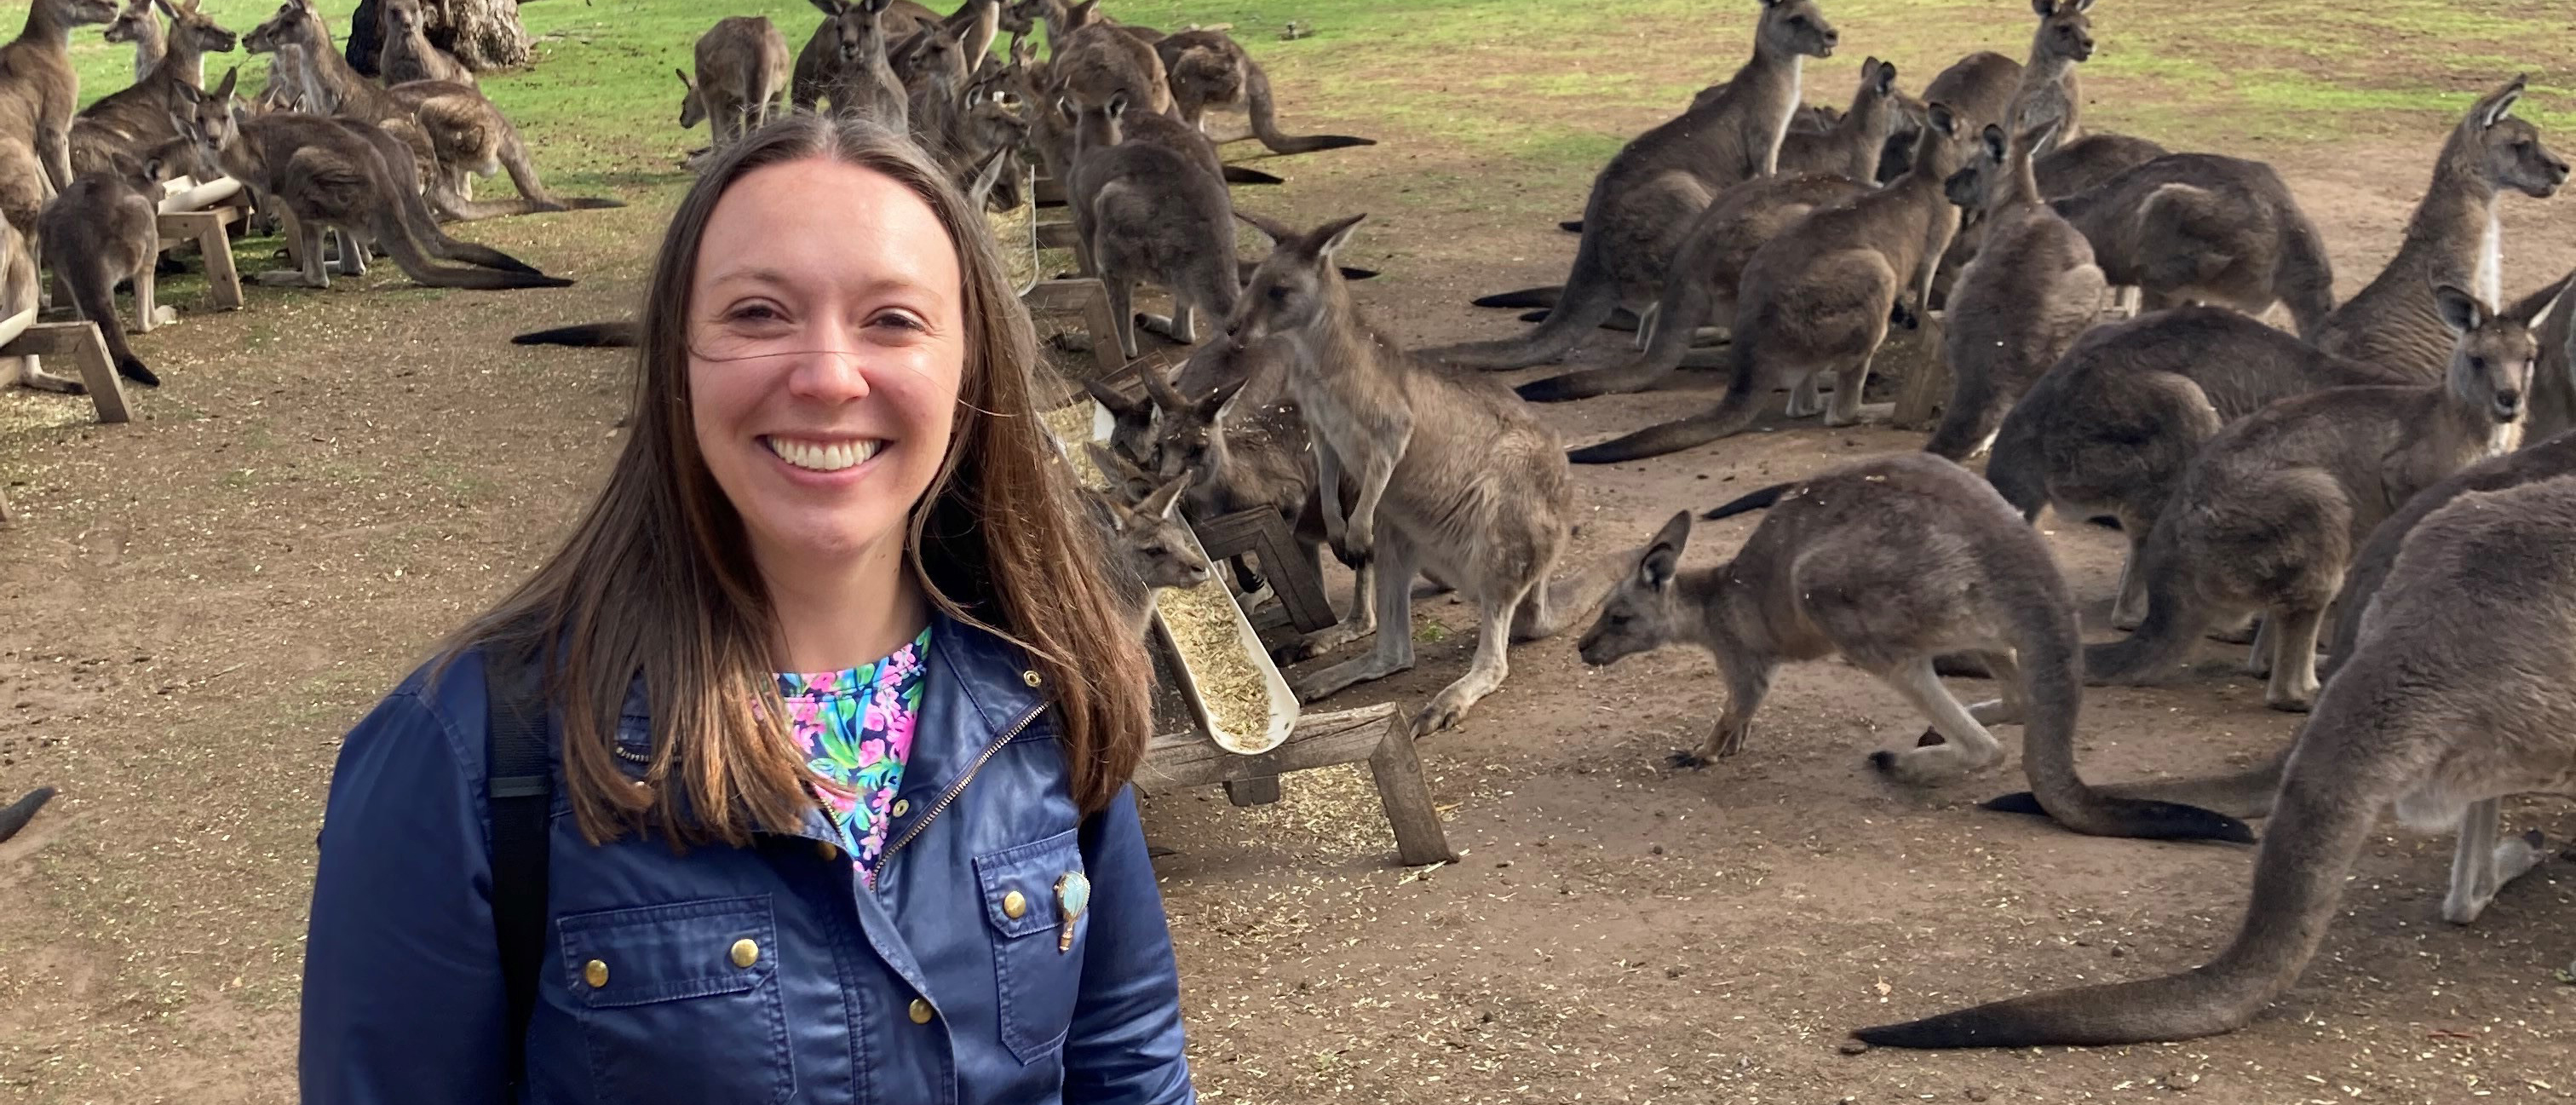 UNE professor Patricia Thibodeau poses with kangaroos in the background